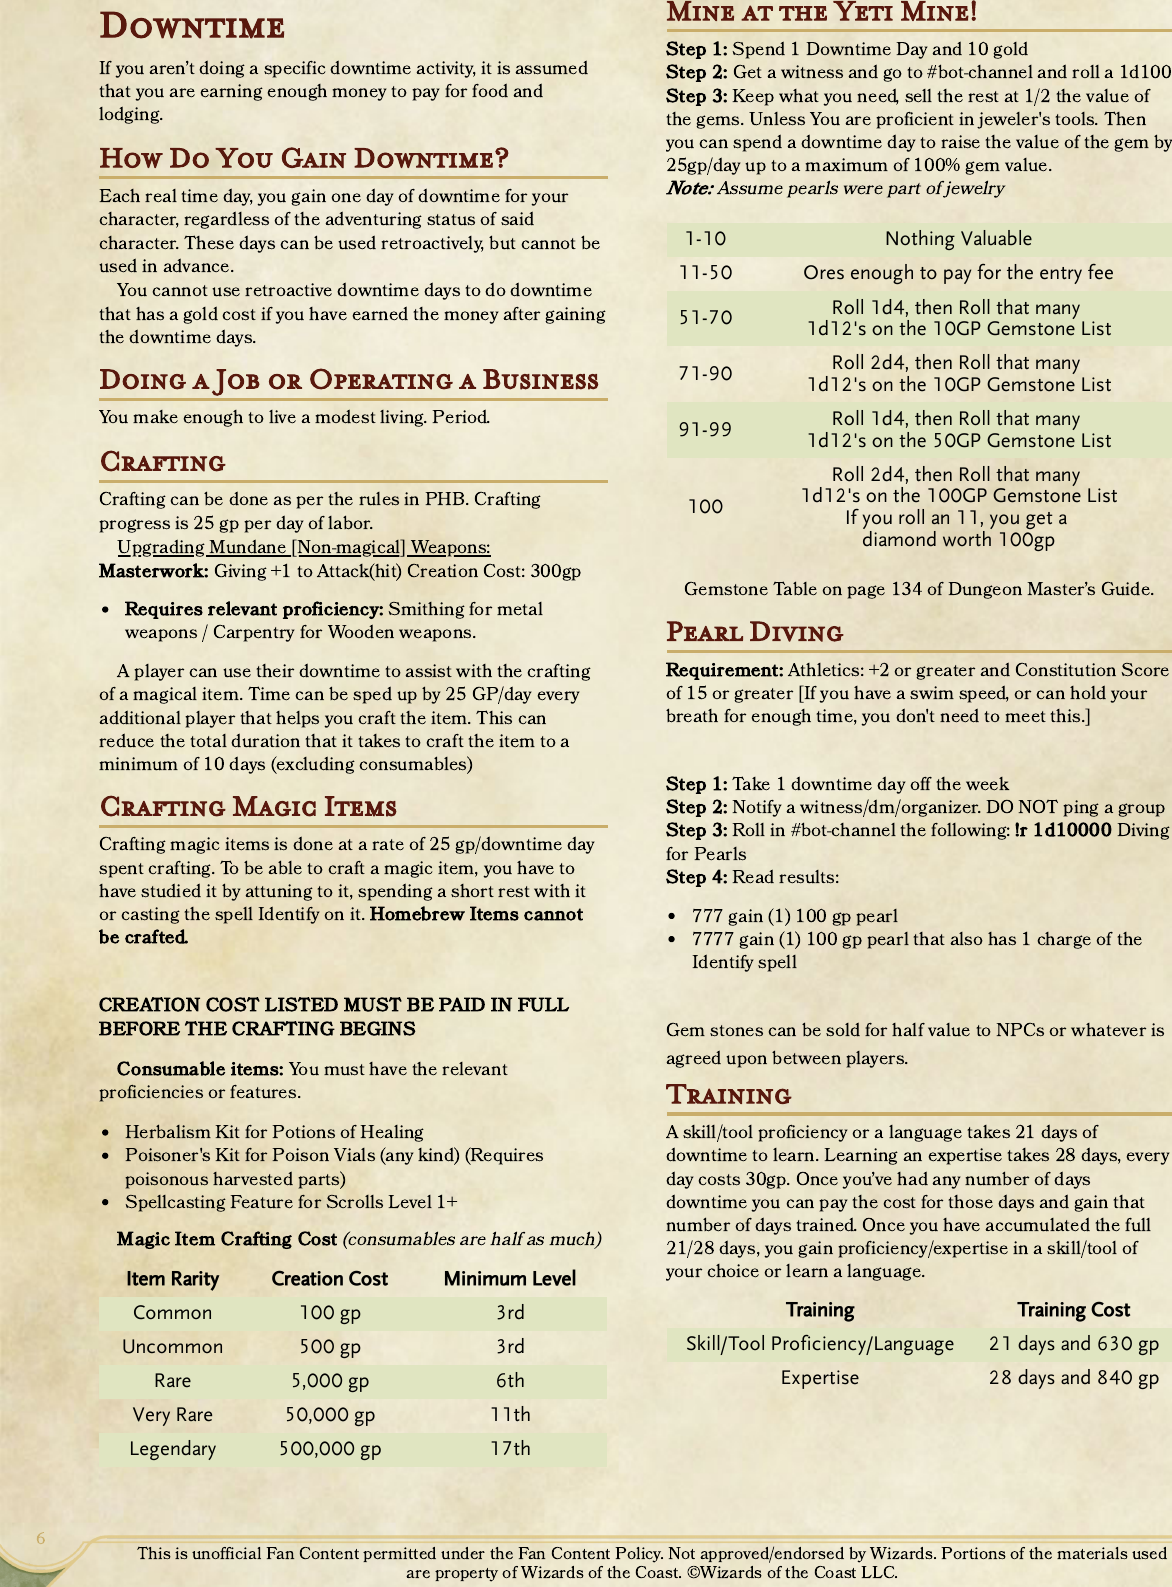 Page 6 of 9 - Player's Guide  GM Binder